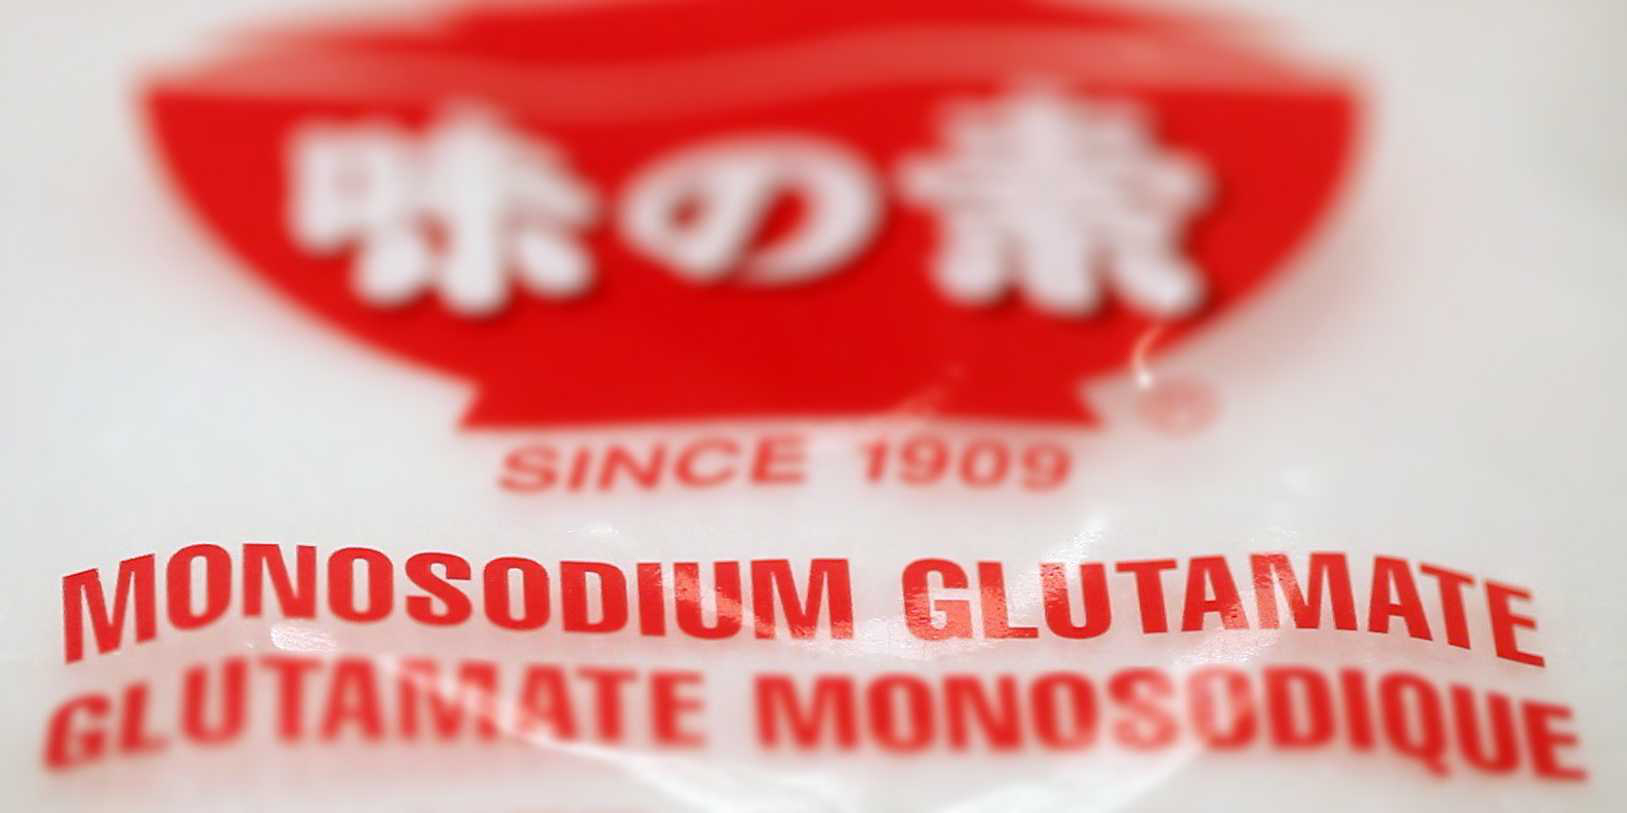 Avoiding MSG

Monosodium glutamate is an ingredient added to many foods to enhance their flavor. It’s completely safe, but it’s often associated with symptoms such as numbness at the base of the neck to a general sense of fatigue. They’re commonly lumped together as “Chinese Restaurant Syndrome.” Eating too much food is most likely the culprit.